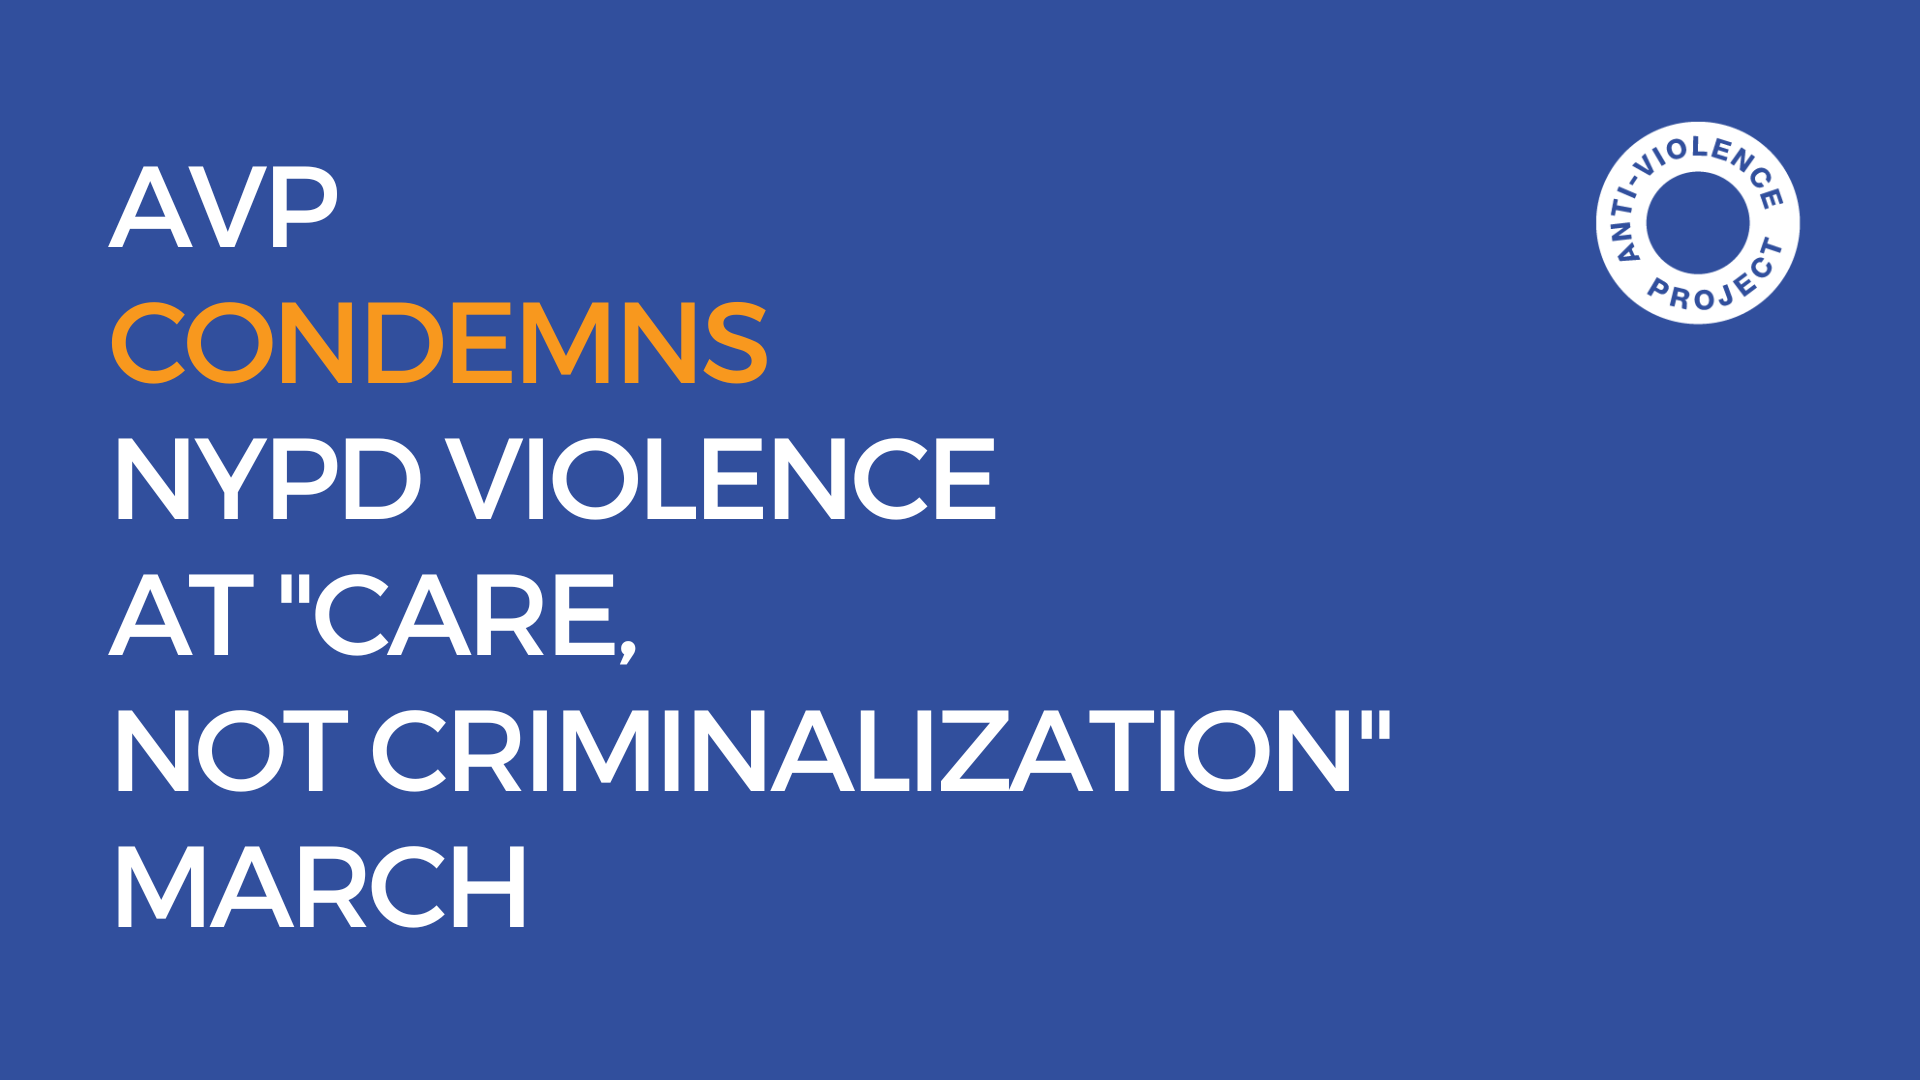 Avp Condemns Nypd Violence Targeting Safety Marshals At “care Not Criminalization” March Nyc